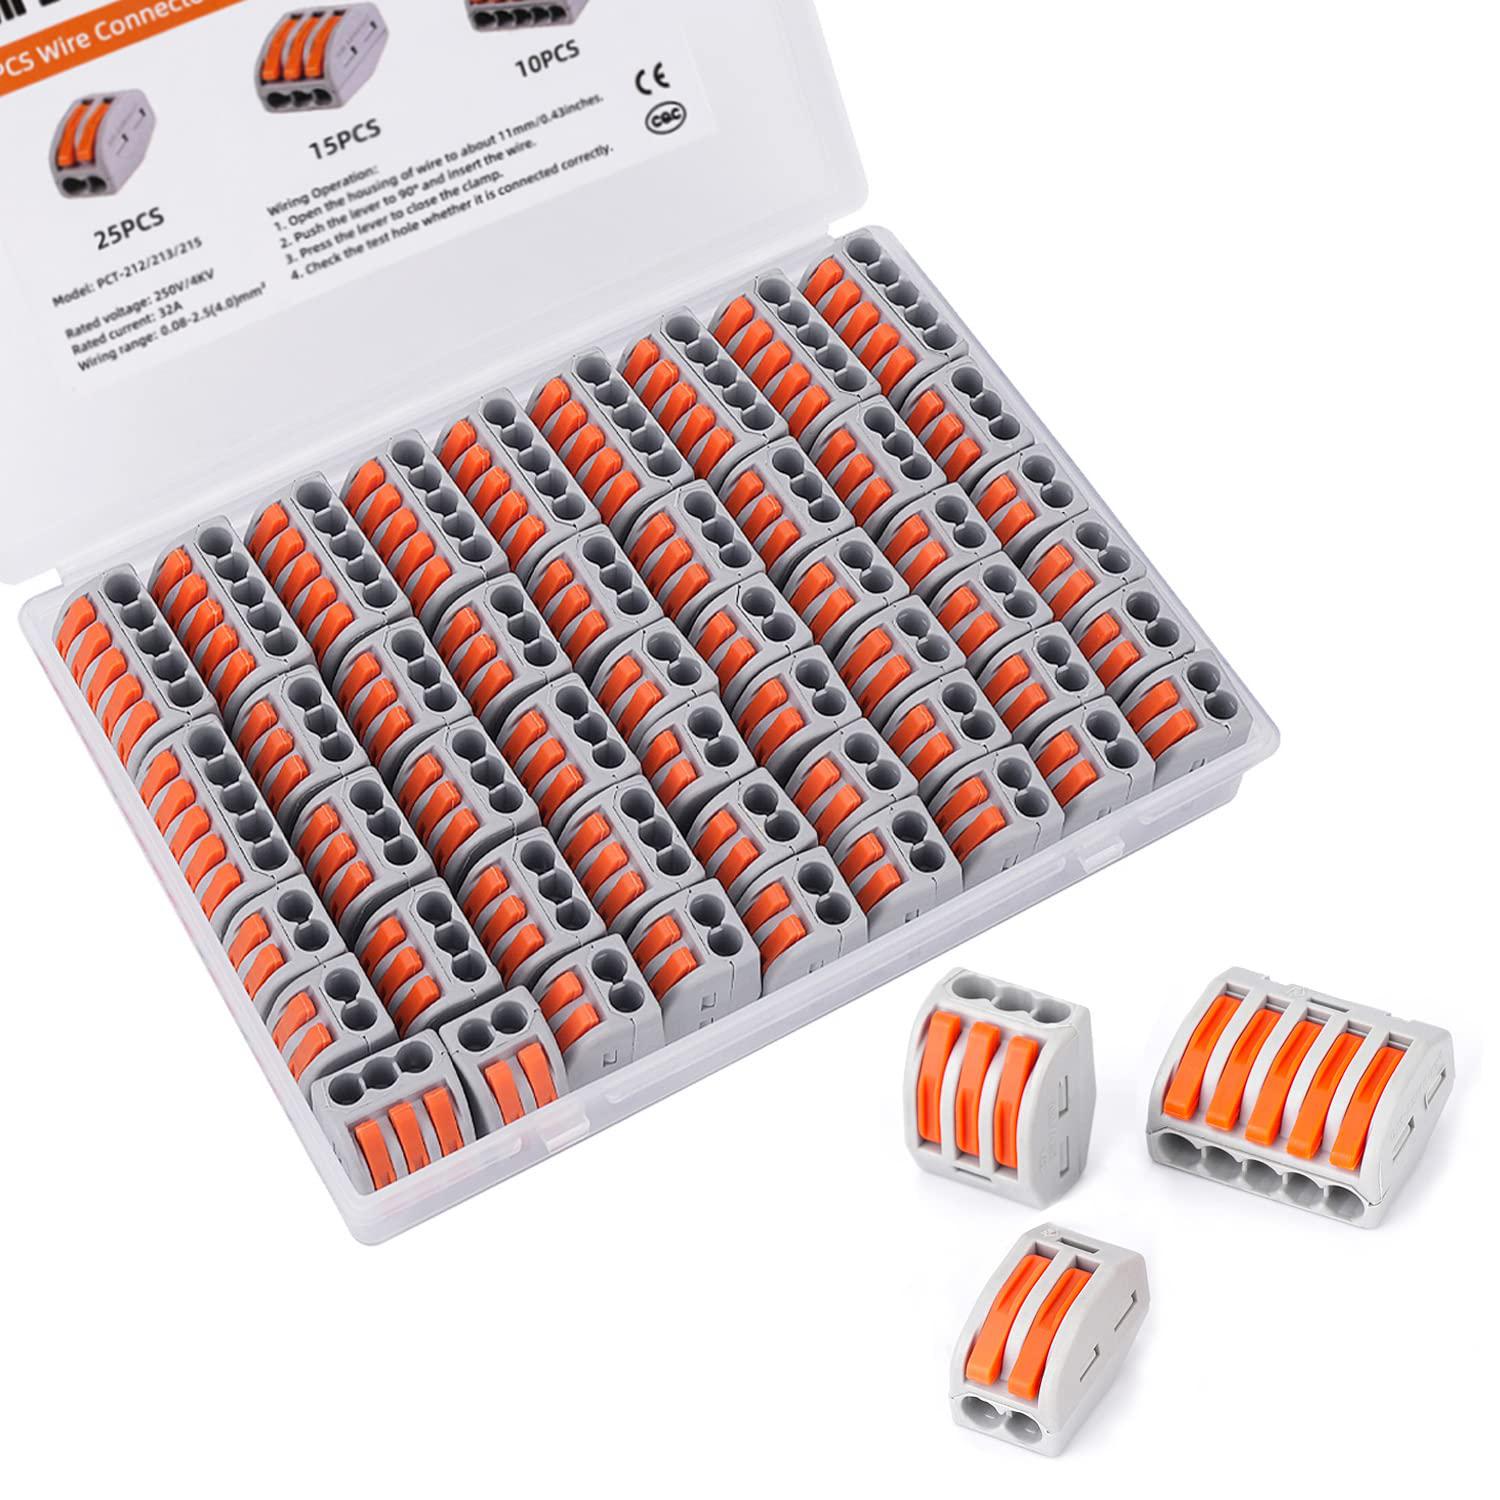 ampele 50pcs electrical connectors kit for for multiple types of wires